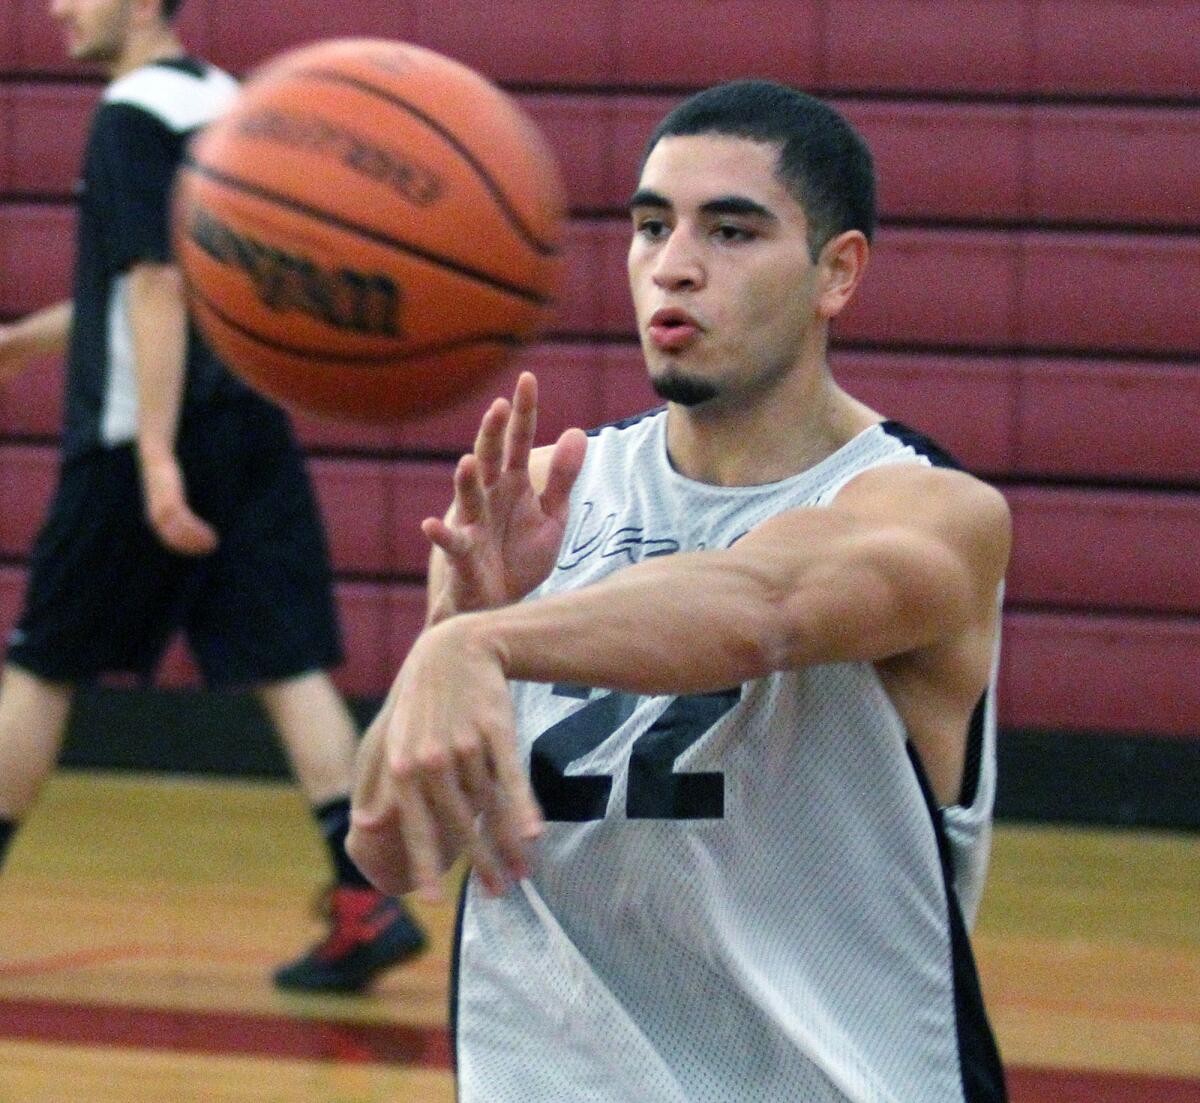 Glendale Community College's Emerson Castaneda makes a pass at practice on campus in the Verdugo Gym on Tuesday, Nov. 5, 2013.